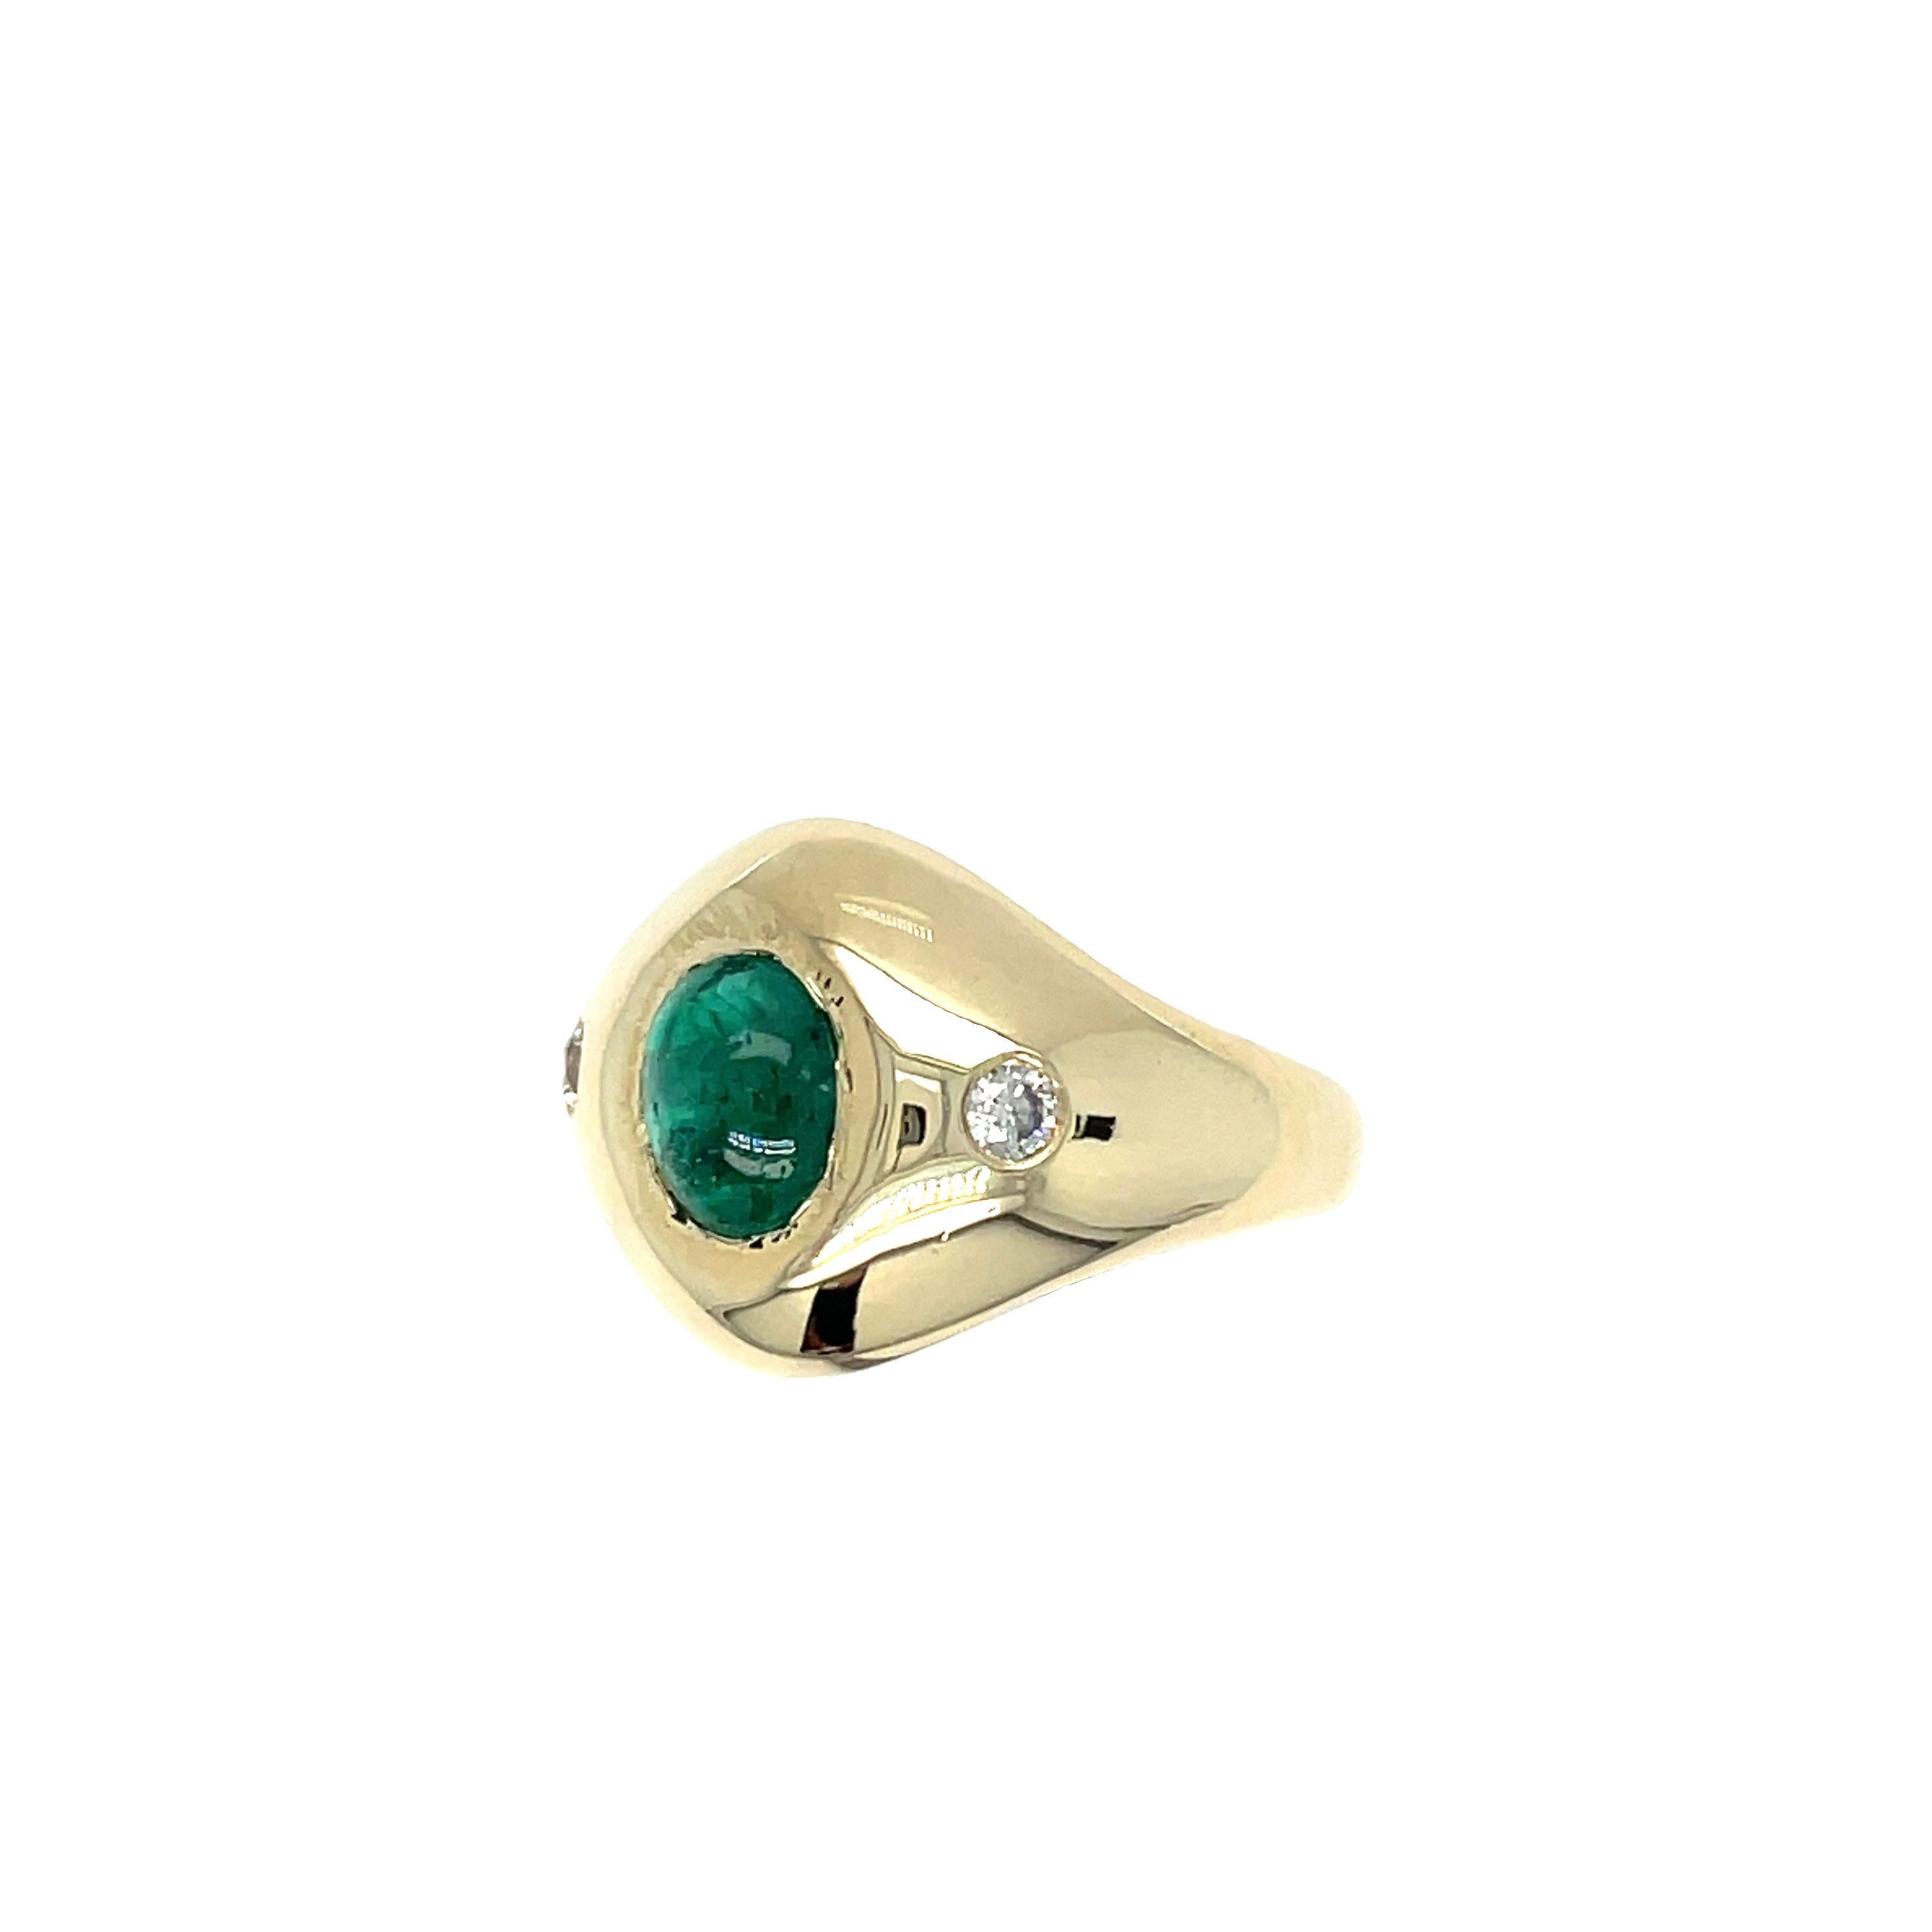 The ring is made of 14k gold and features a classic 3-stone style. The center stone is a large oval cabochon emerald with a high dome, which makes it stand out on the hand. The emerald is 1.52 carats and exhibits a deep green color with very good